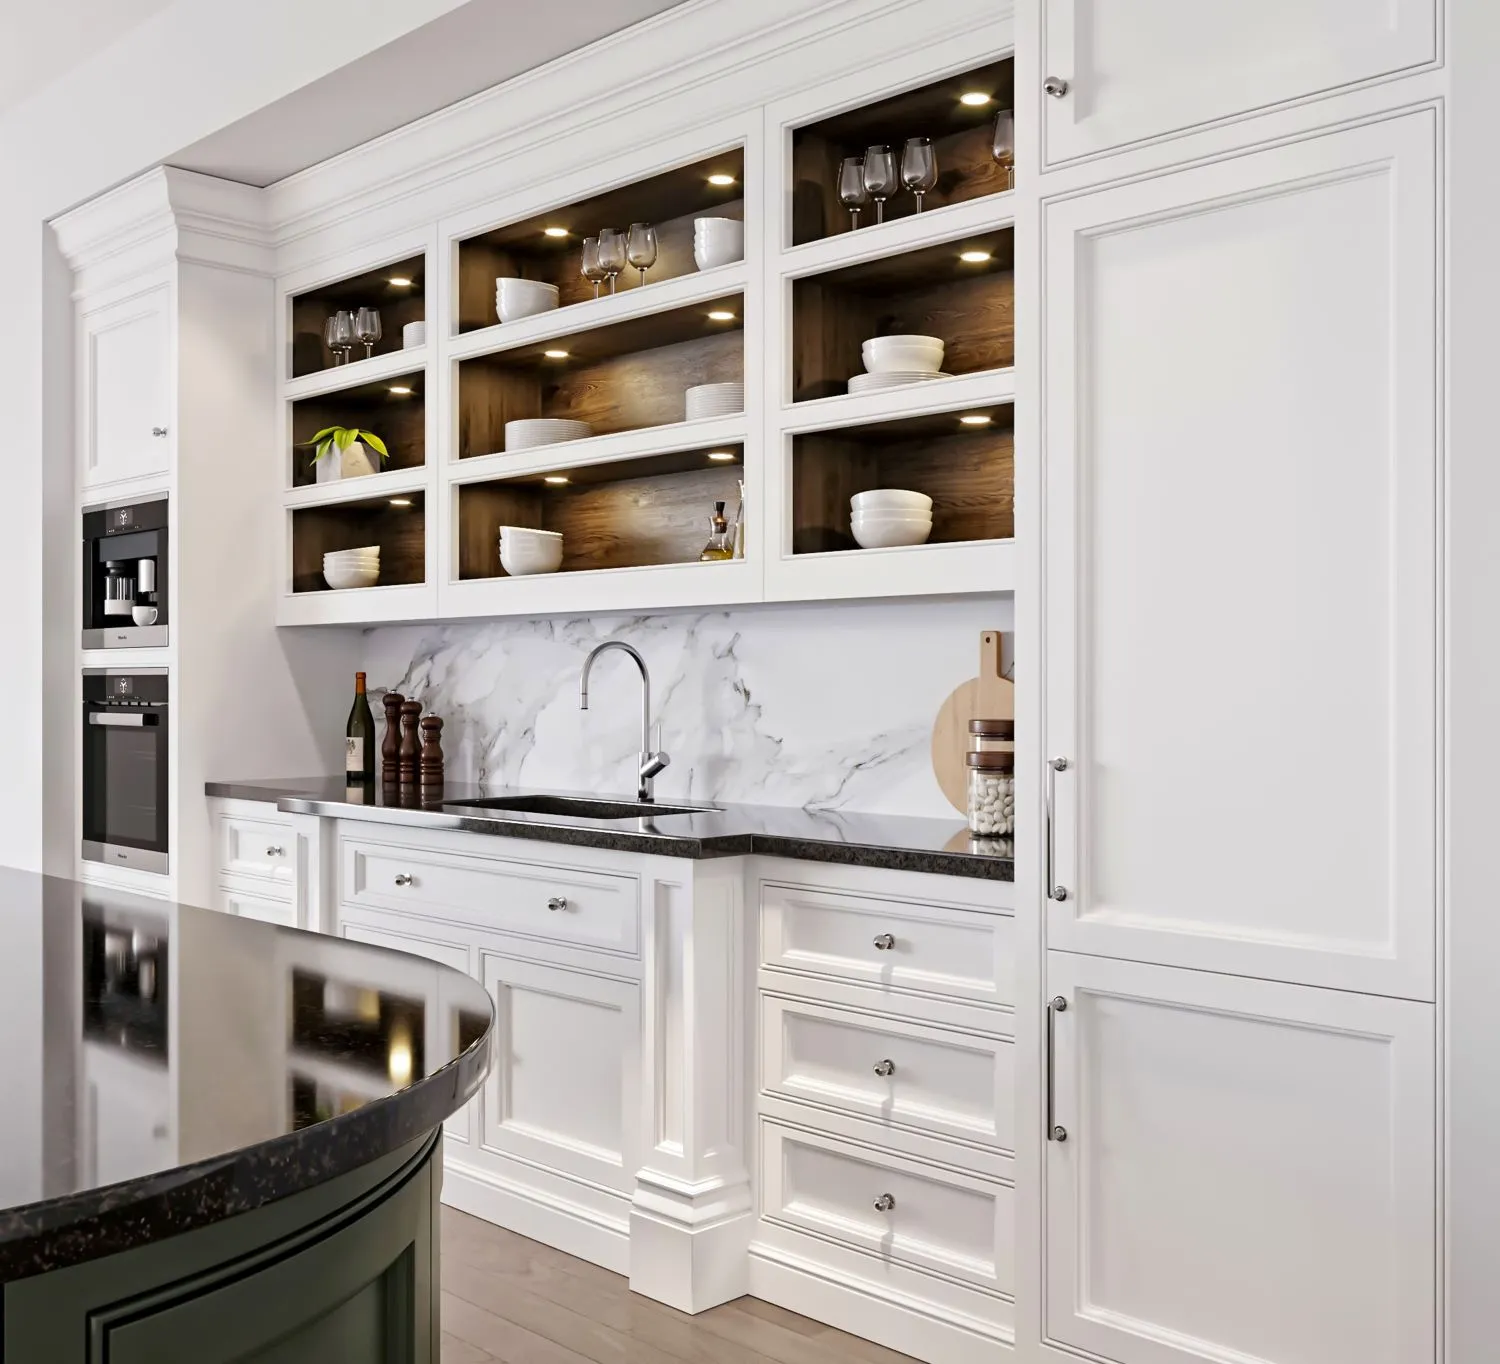 The standard depth for a pantry is 24 inches, while their width can range from 18 to 36 inches.